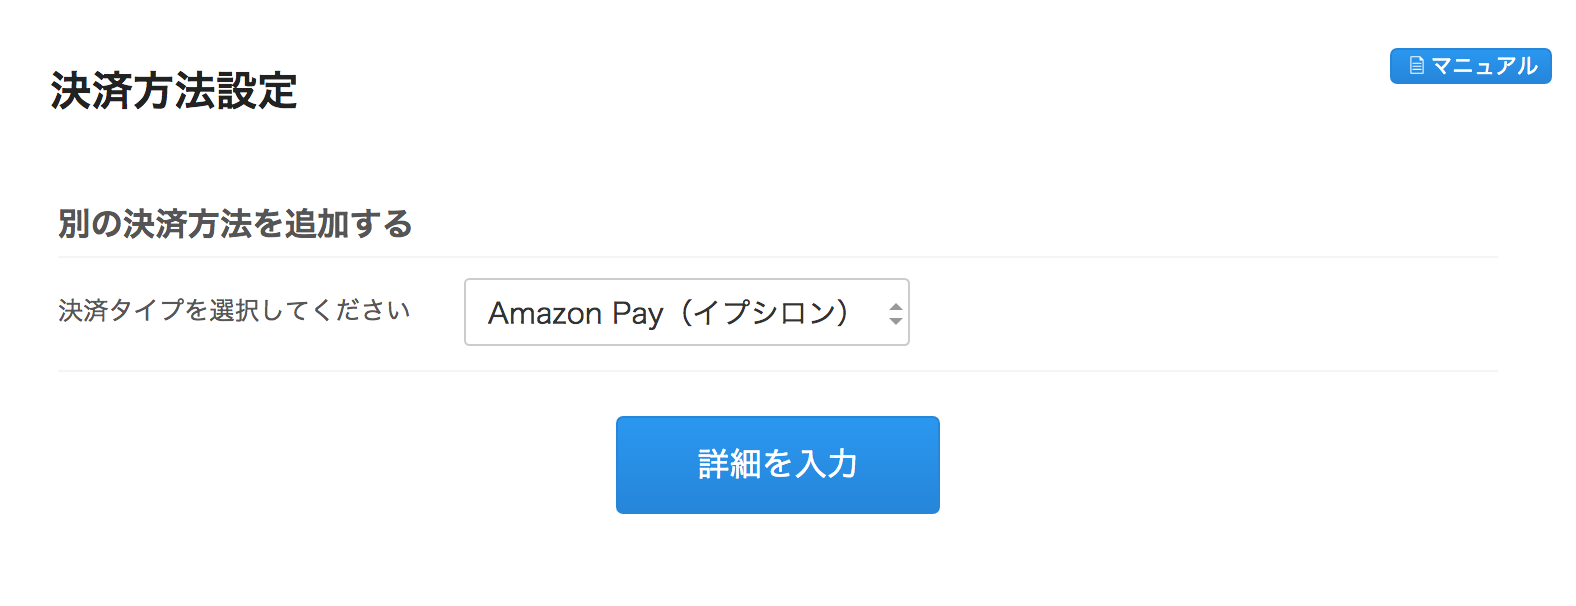 amazonpay.png